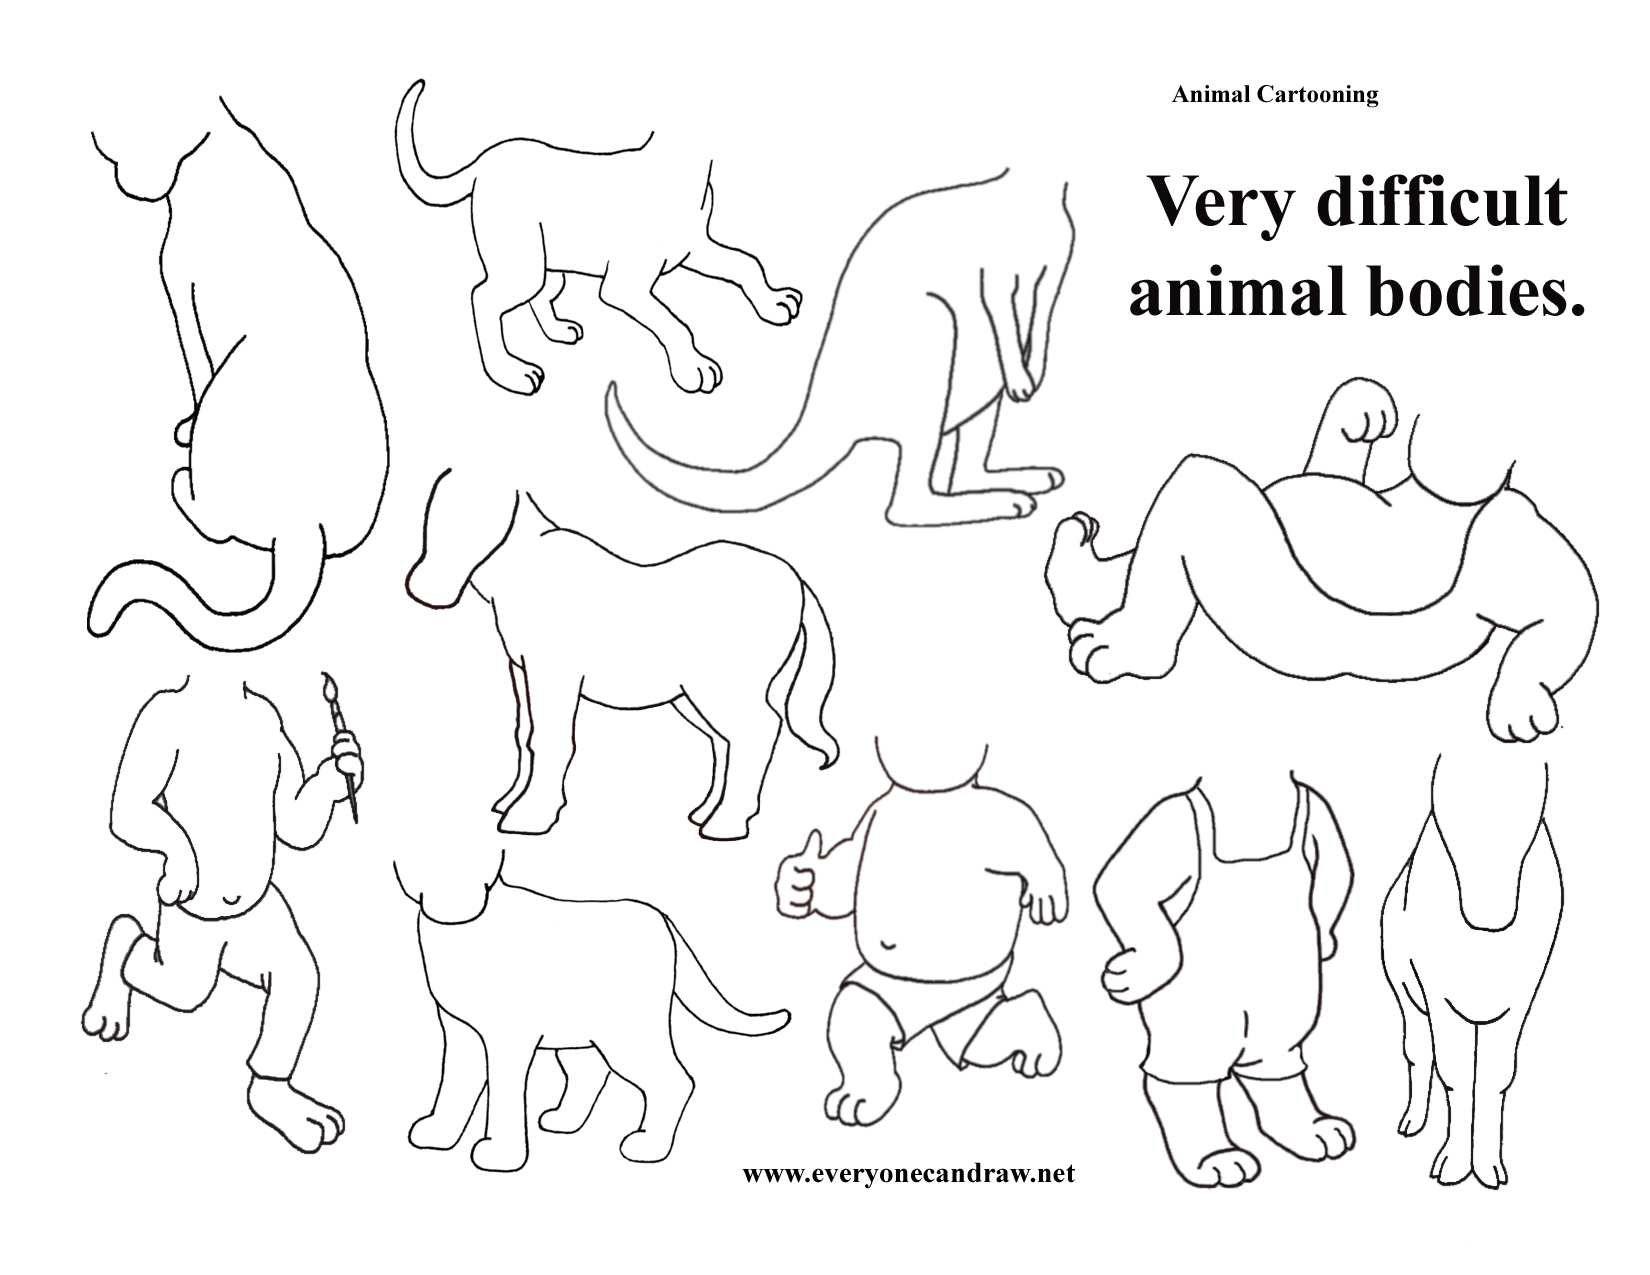 Animal bodies - very difficult